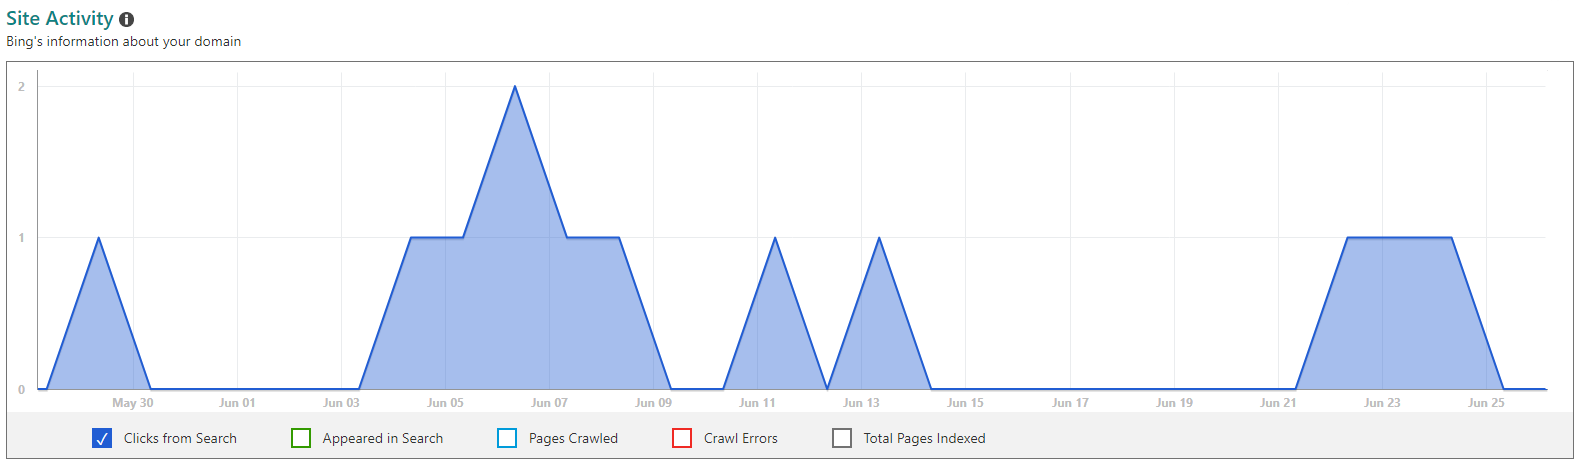 Site Activity graph section in Bing Webmaster Tools